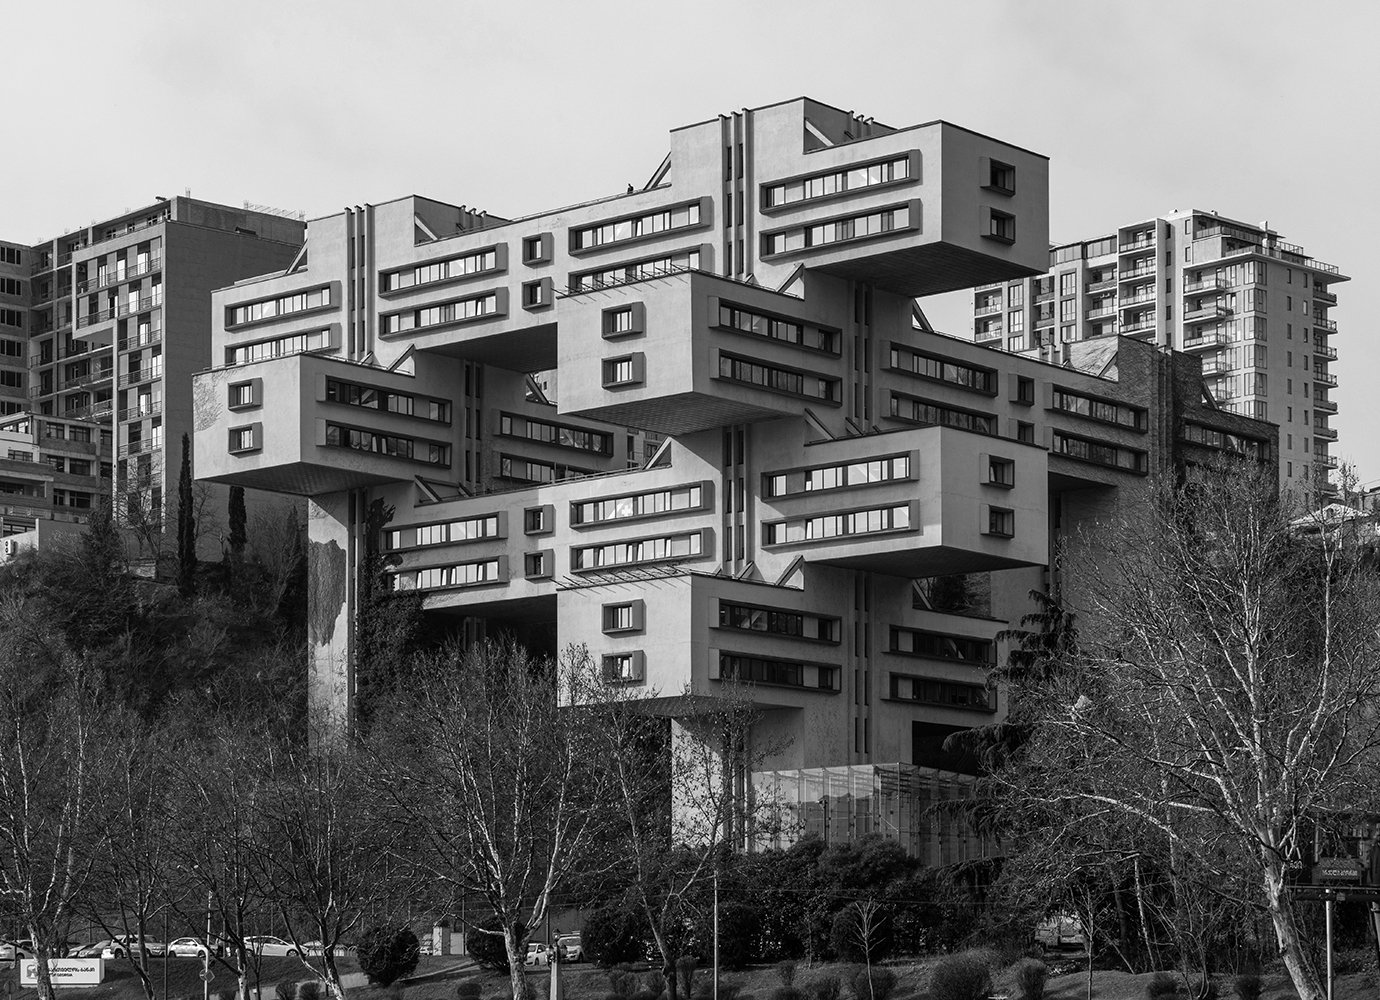 Brutalism at home: a photographer’s Instagram account looks at socialist modernist architecture with fresh eyes 